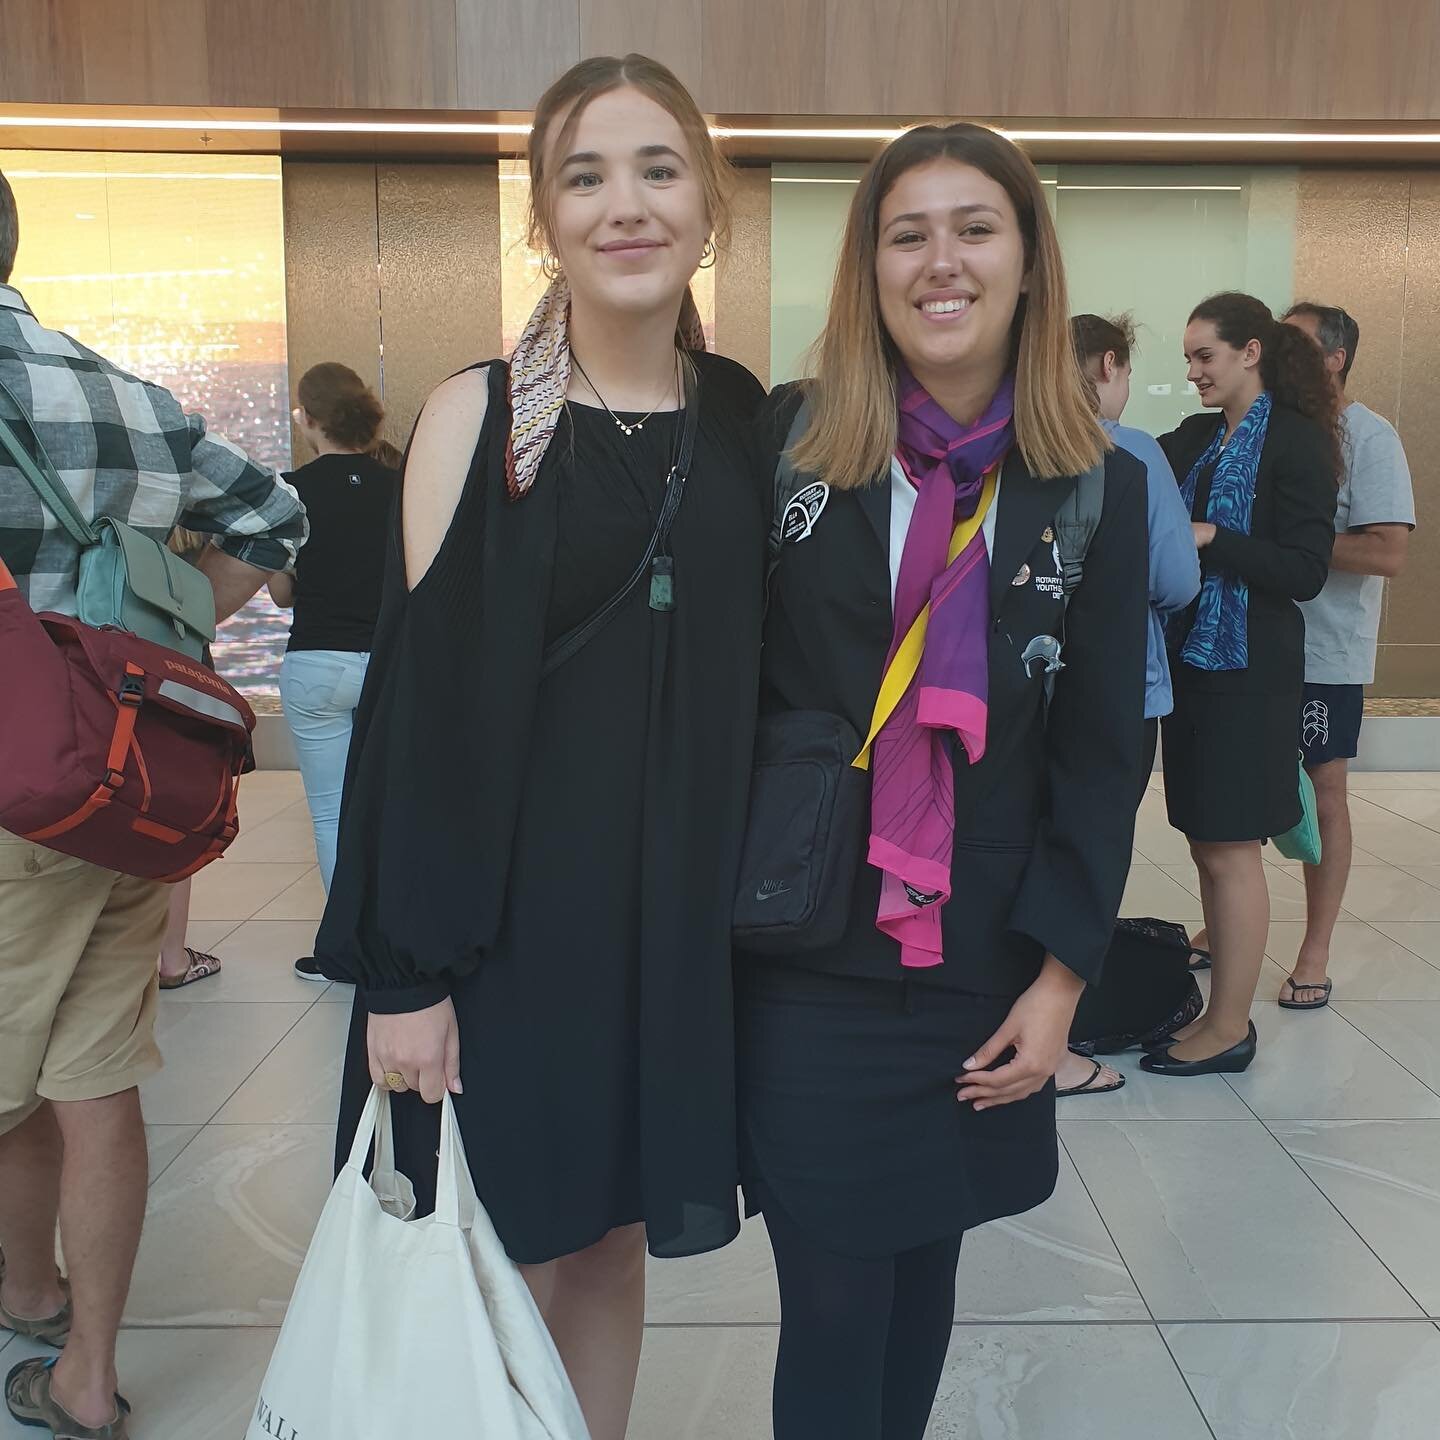 Rotary Takapuna North plays an active role in Rotary Youth Exchange program.
Here we have Amalie on the left, our current inbound exchange student from Denmark, and on the right Ella, our outbound exchange student at the airport departing on her year